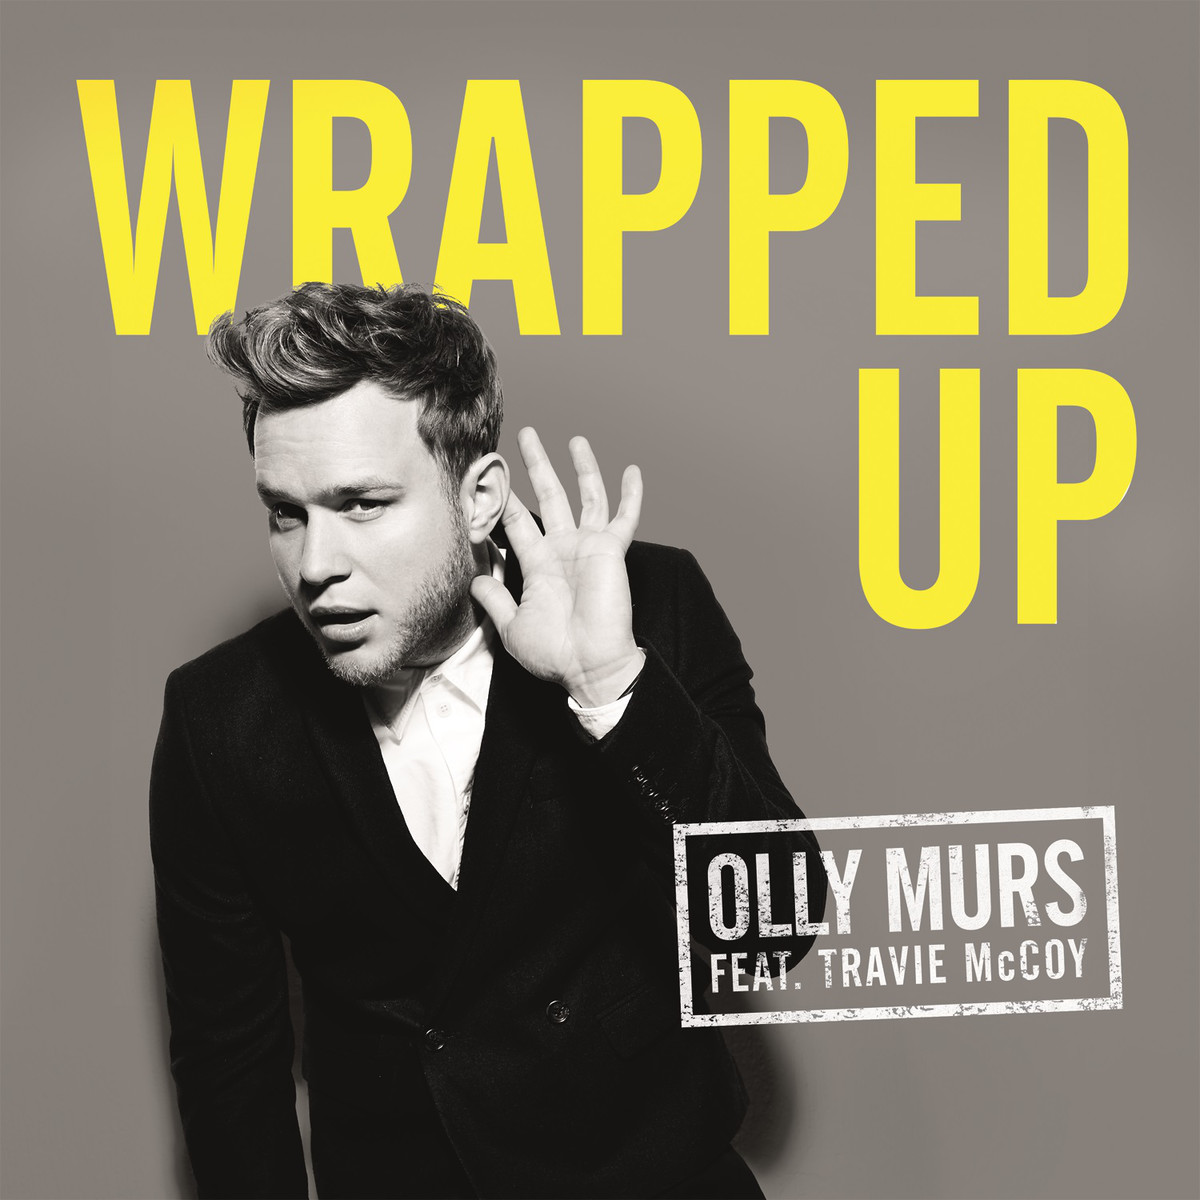 Olly murs wrapped up 2014 1200x1200